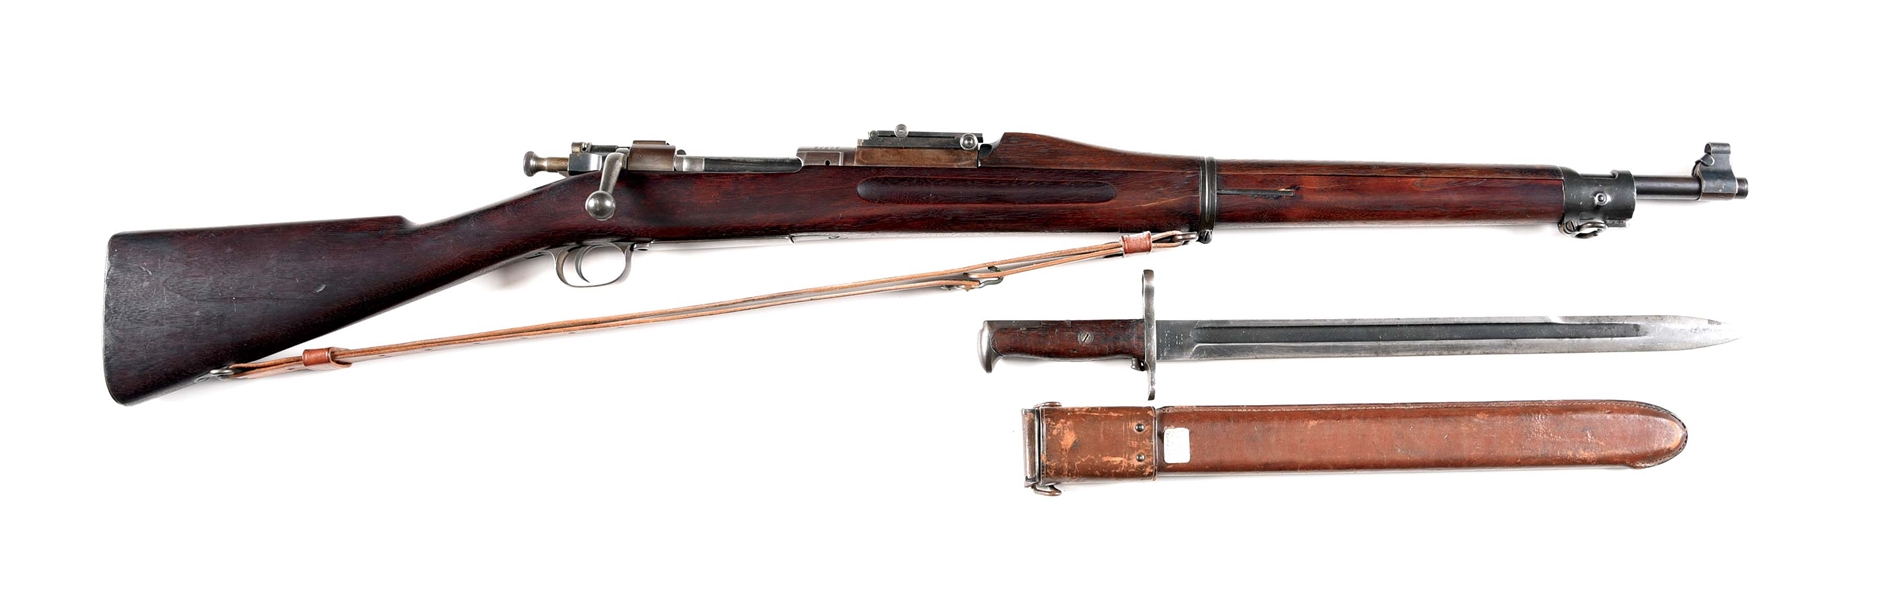 (C) US SPRINGFIELD MODEL 1903 30-03 CALIBER BOLT ACTION RIFLE WITH 1905 MODIFICATION.